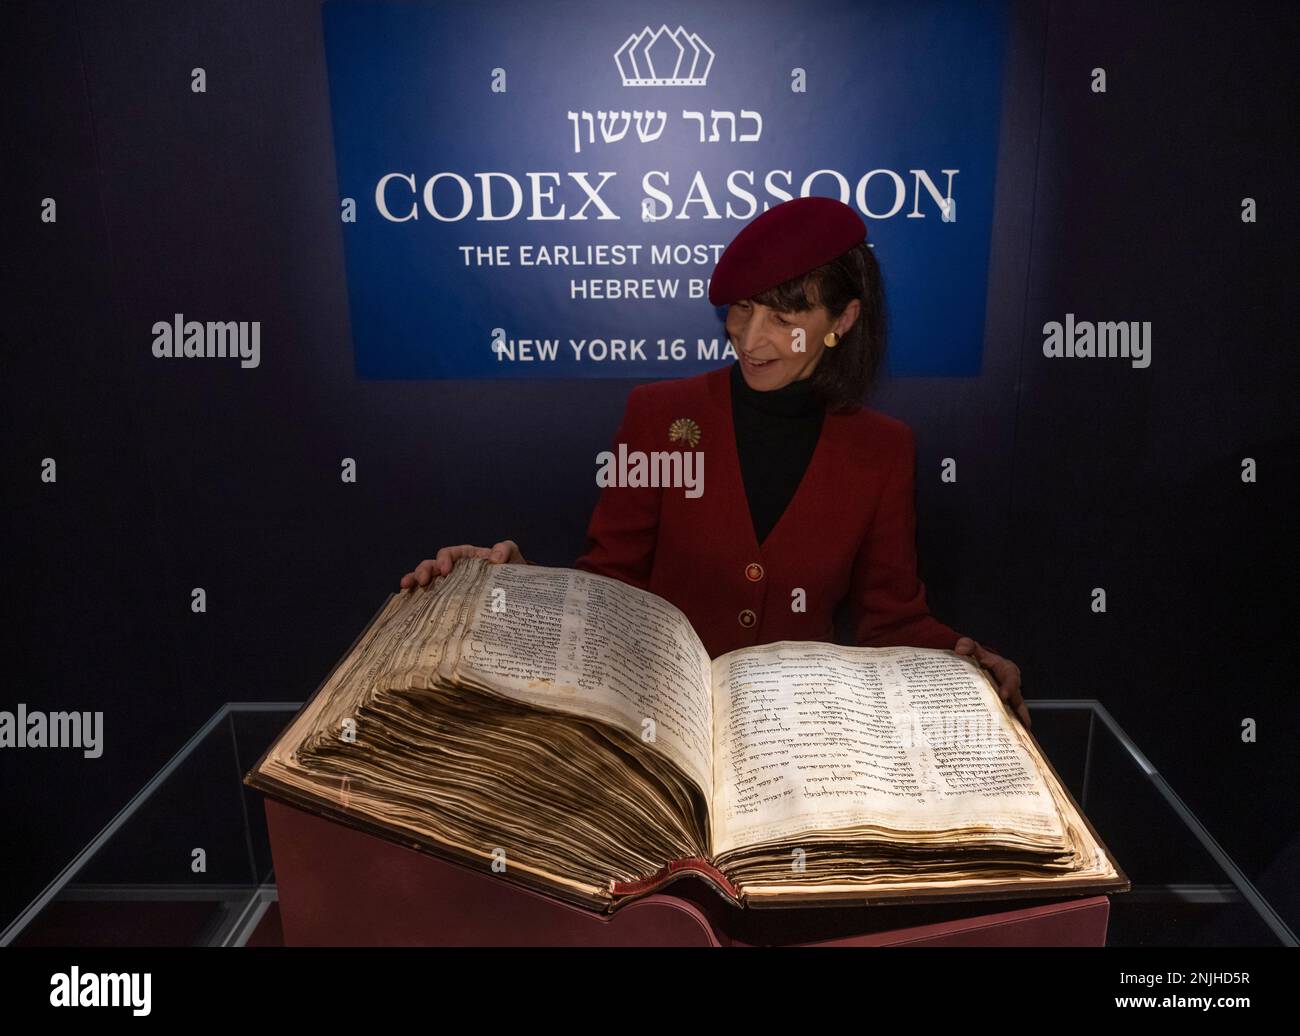 Sotheby’s, London, UK. 22 February 2023 (Image EMBARGOED until 01.00am GMT on Thursday 23 February 2023). The earliest and most complete Hebrew Bible, known as Codex Sassoon, will be offered in New York in May, estimated at $30,000,000-50,000,000, considered one of the most influential books in history. A global tour sees the magnificent volume return to display, beginning with an exhibition 22–28 February at Sotheby’s in London, followed by stops in Tel Aviv, Dallas, Los Angeles and New York City. Credit: Malcolm Park/Alamy Live News. Stock Photo